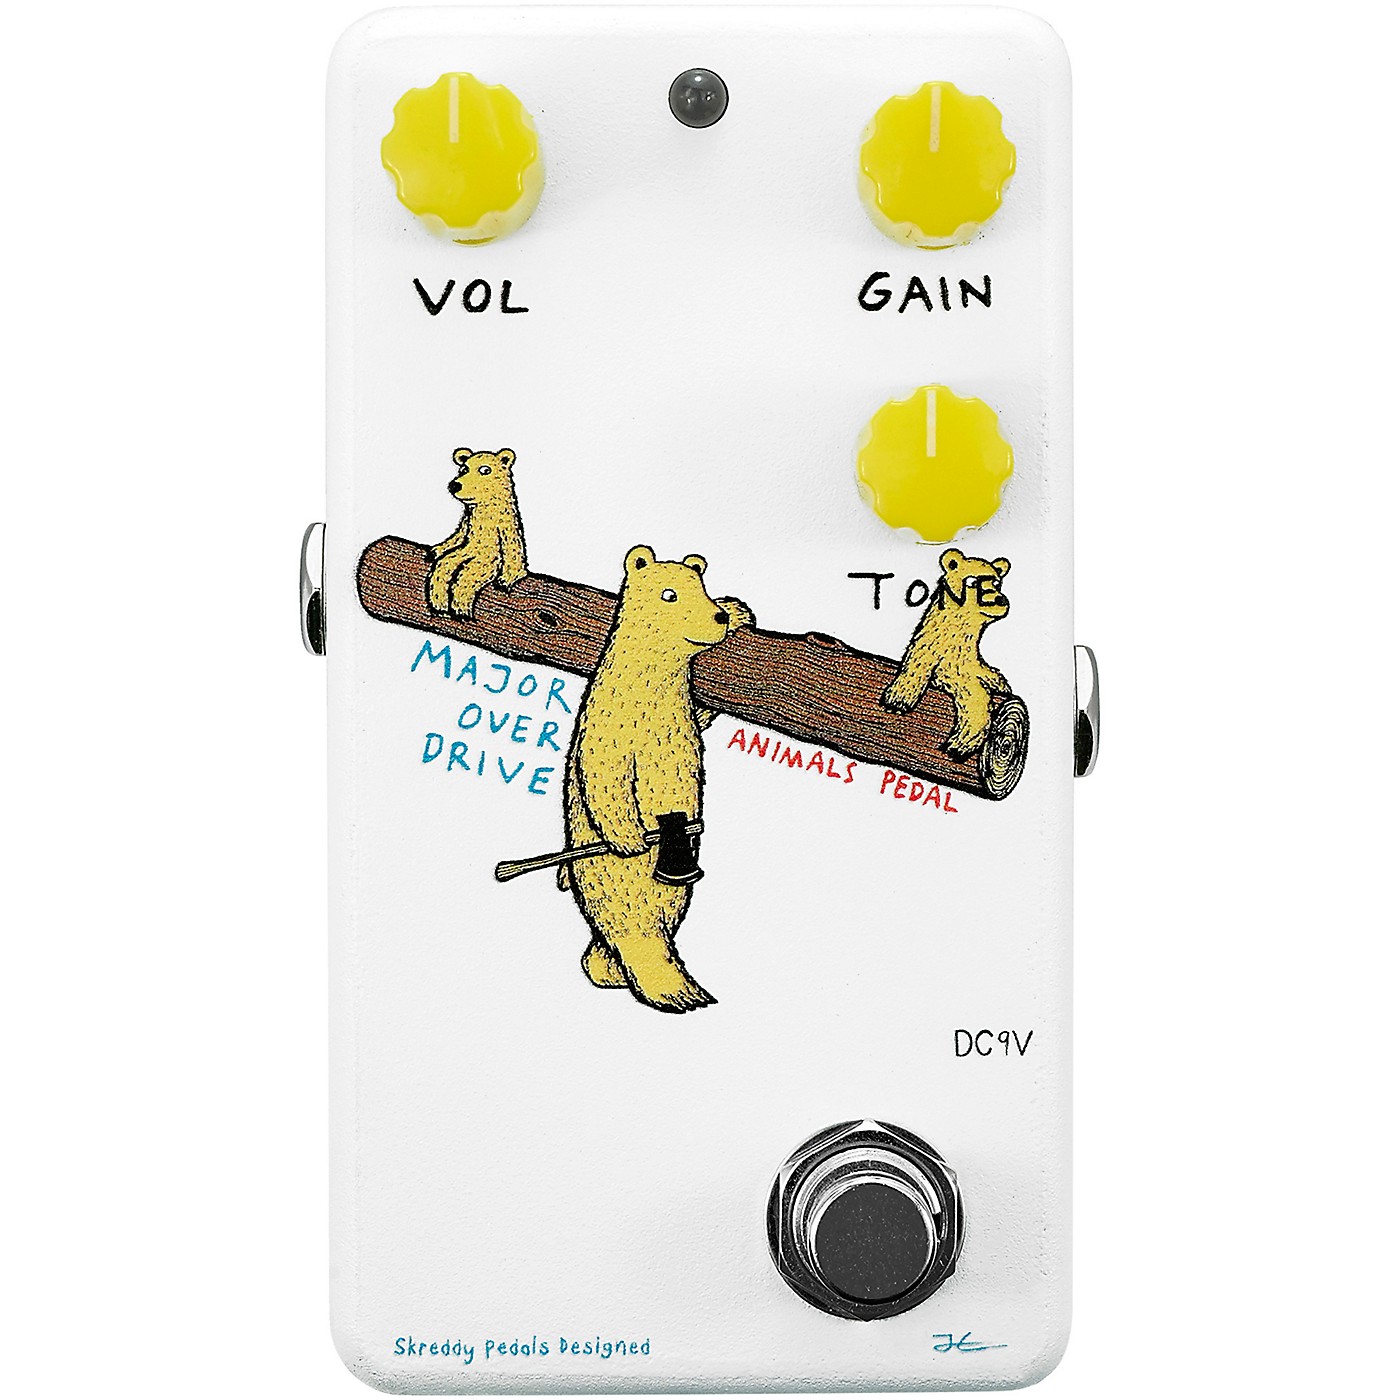 Animals Pedal Major Overdrive V2 Effects Pedal thumbnail